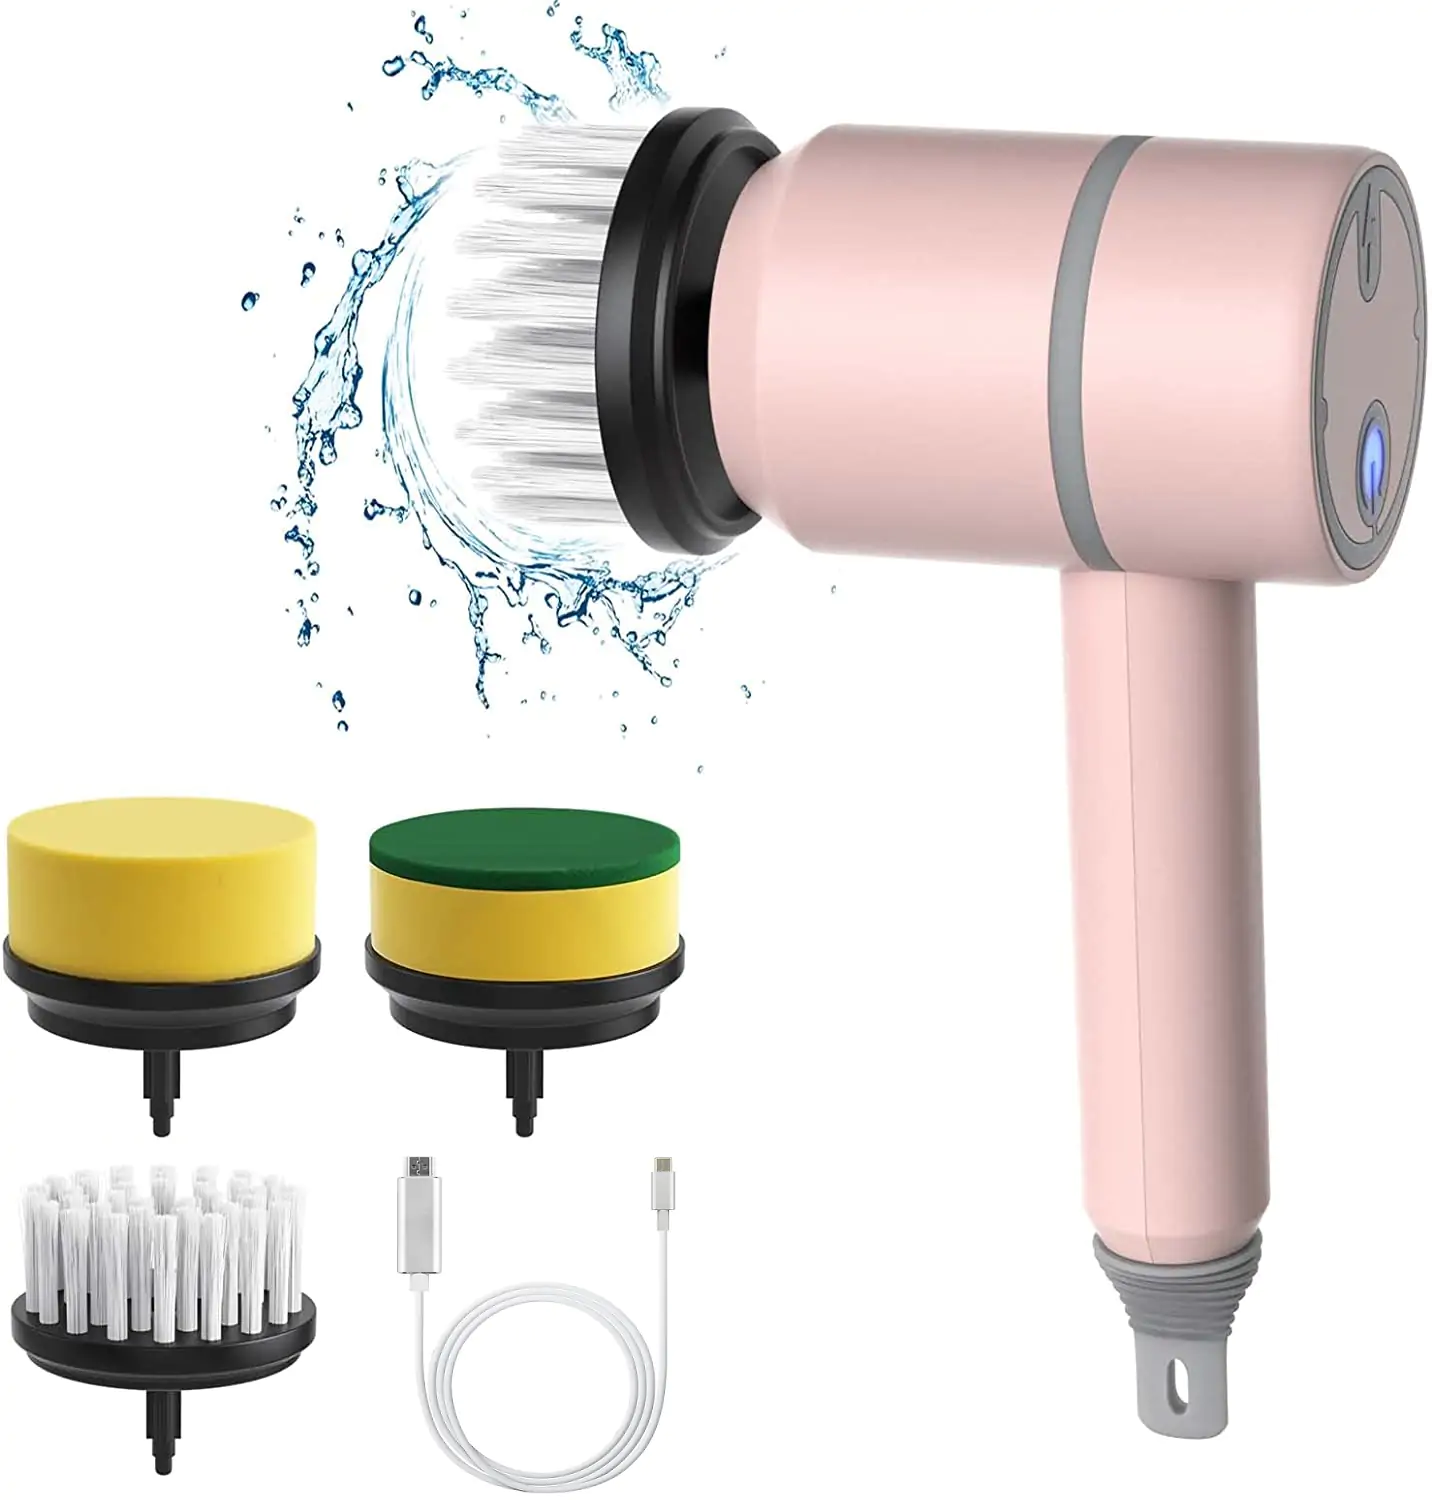 Electric Spin Scrubber Rechargeable Power Scrubber Cleaning Brush with 3  Brush Heads Portable Scrubber Kit Suitable for Bathroom Kitchen 